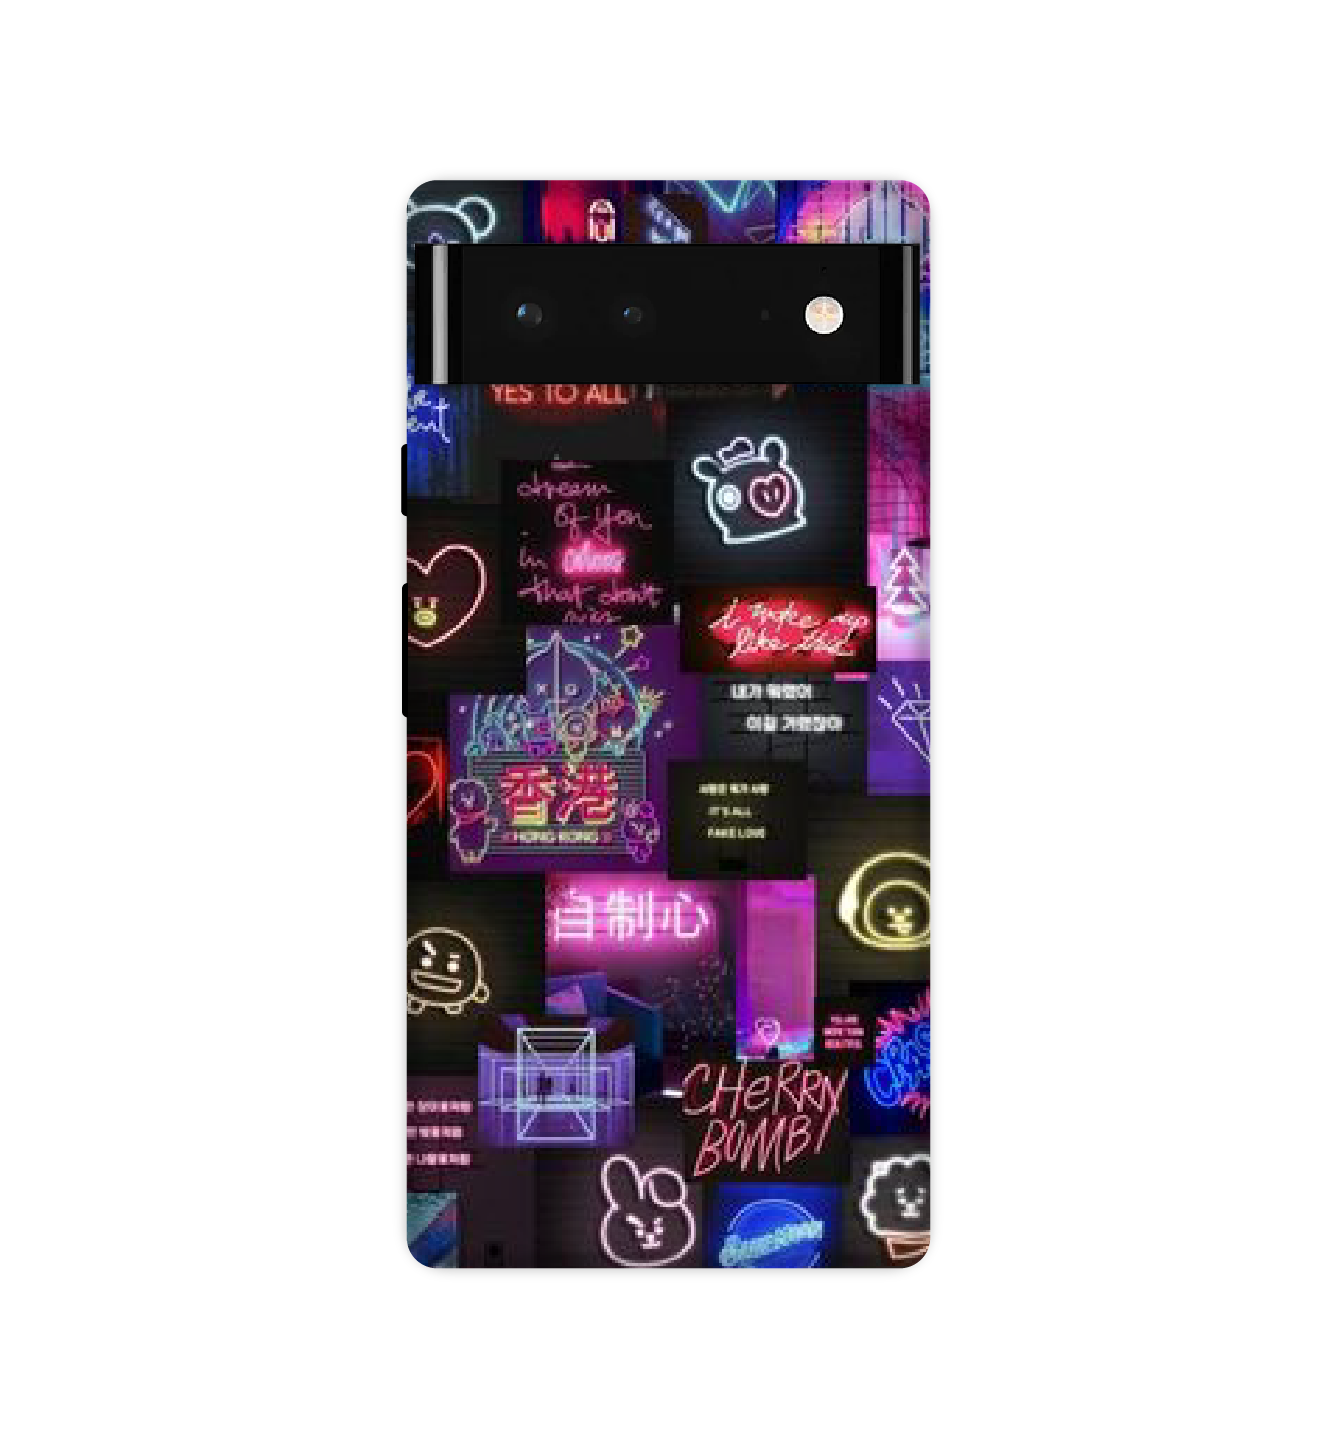 Neon Collage - Hard Cases For Google Models